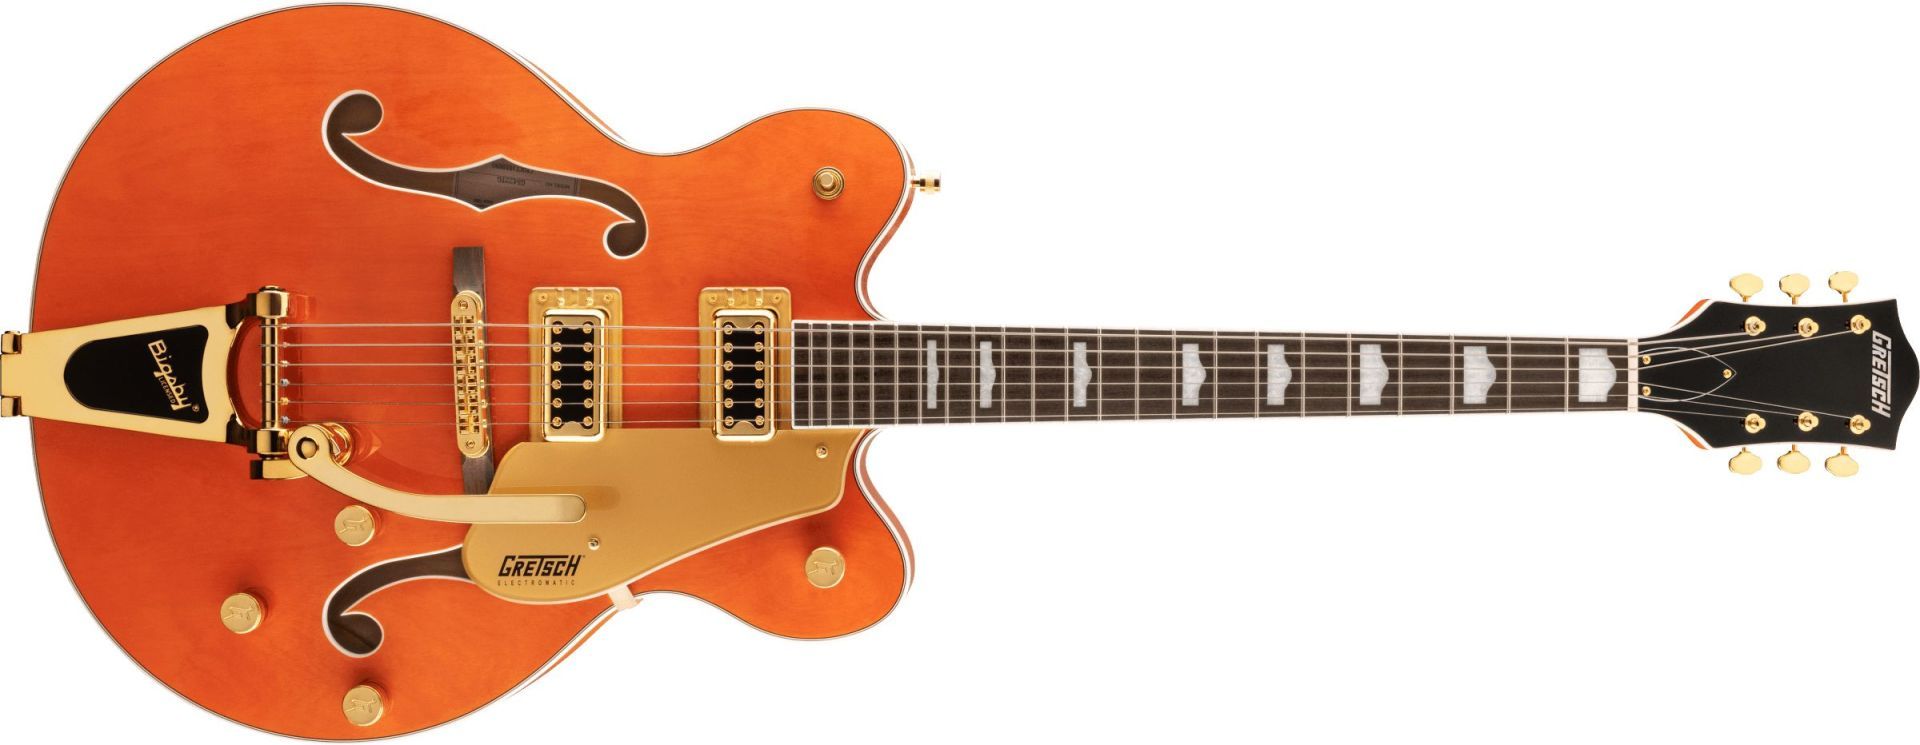 Gretsch G5422TG Electromatic Classic Hollow Body Double-Cut Orange Stain